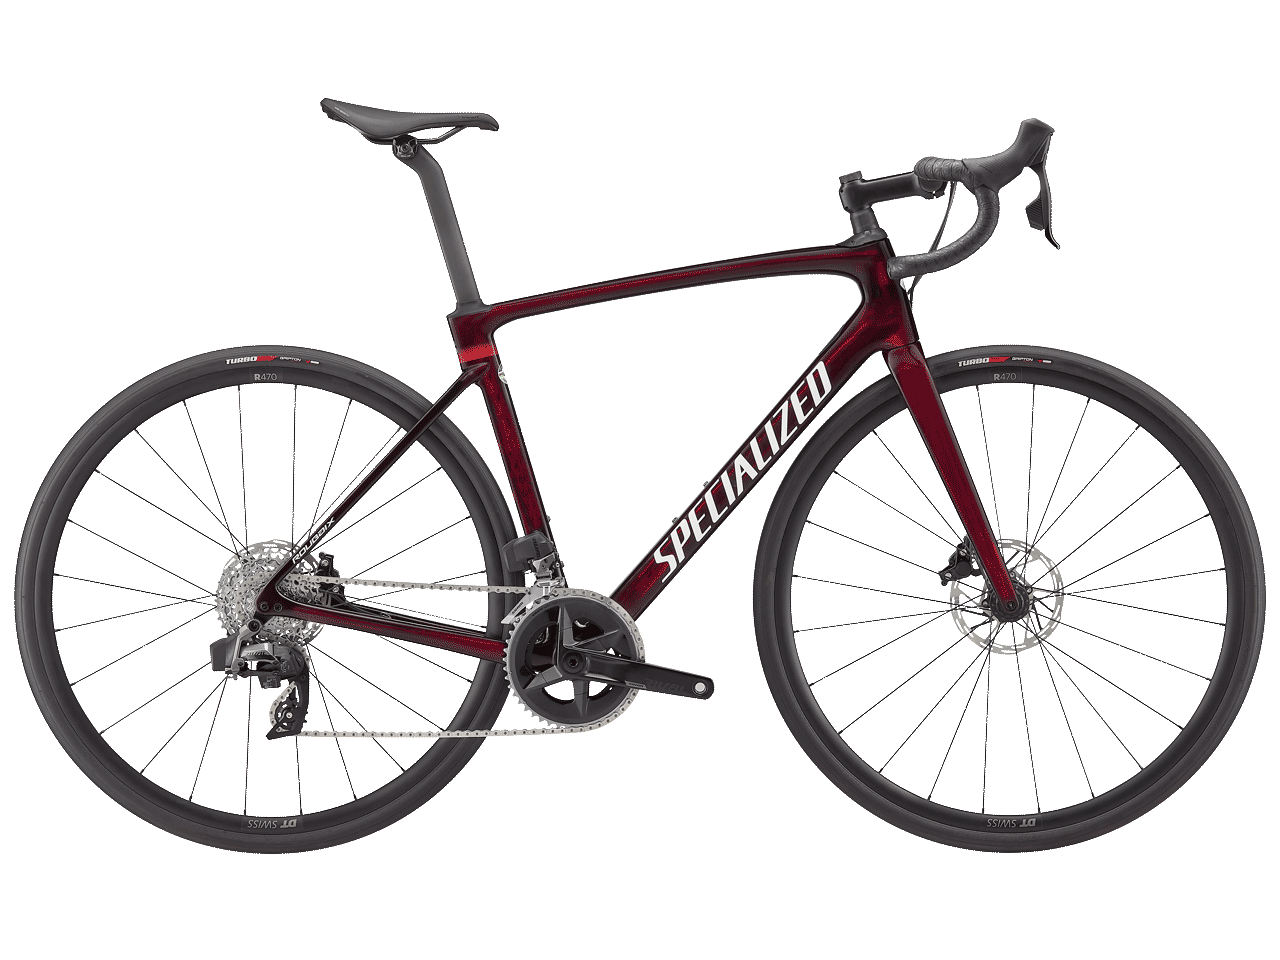 The Specialized Roubaix